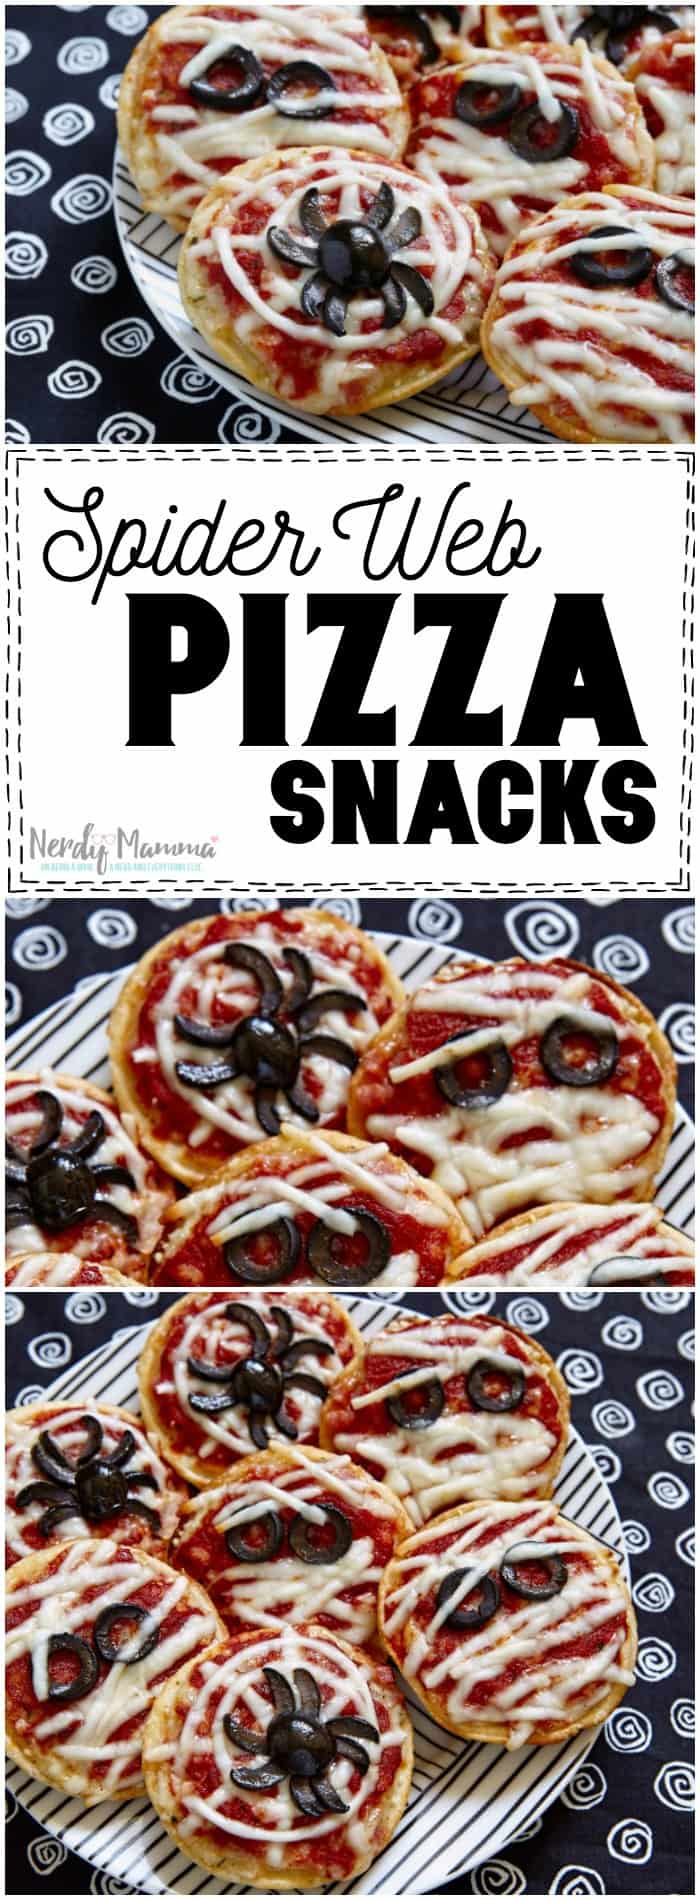 Oh, the kids are going to love this Halloween appetizer recipe for Sider Web Pizza Snacks. Seriously--this recipe is good.